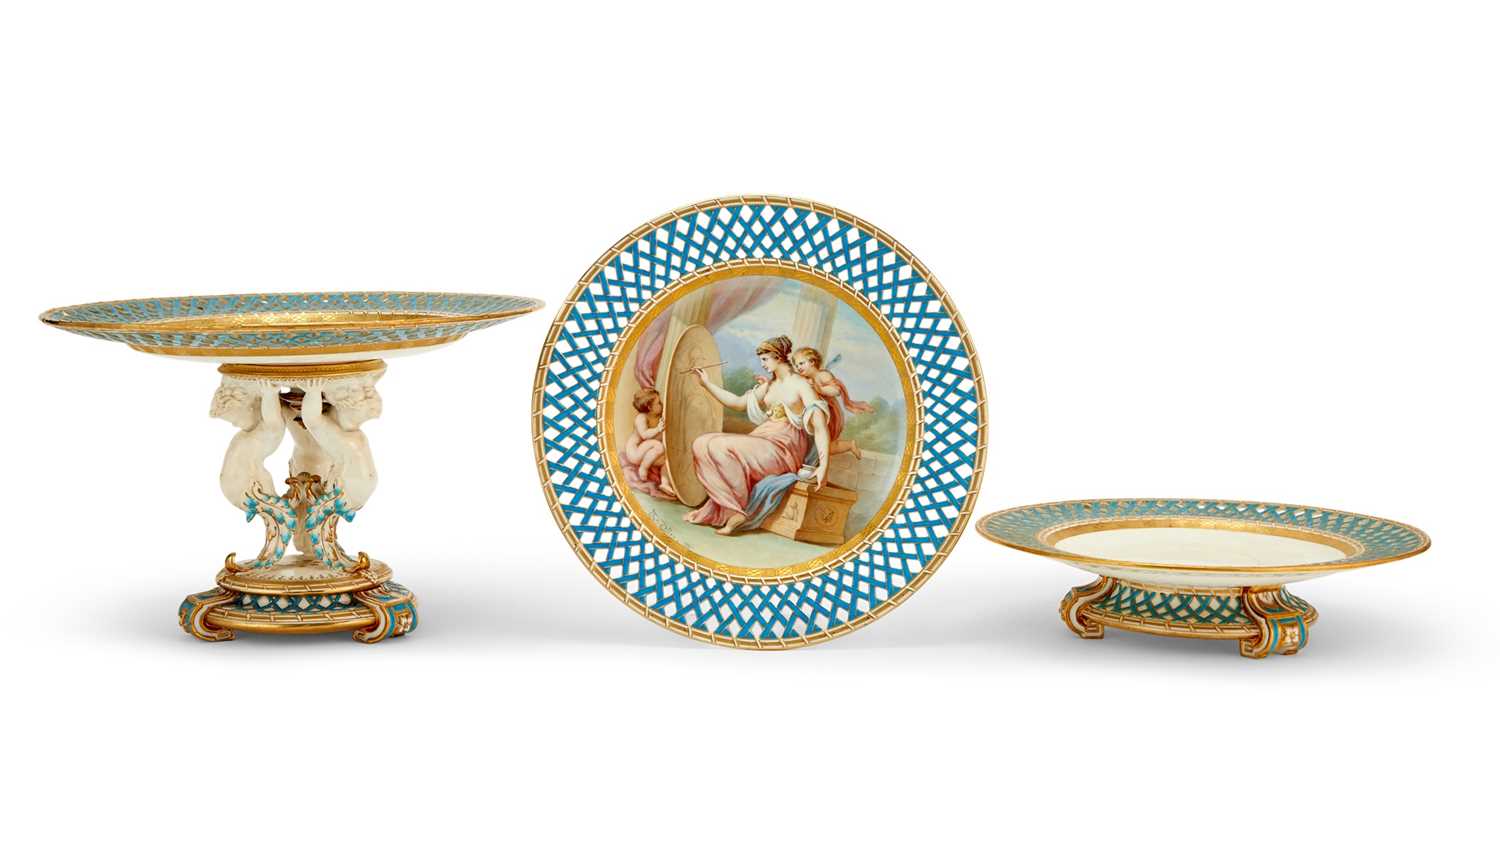 Lot 90 - Group of English Porcelain Reticulated Cabinet Plates Depicting Neoclassical Scenes